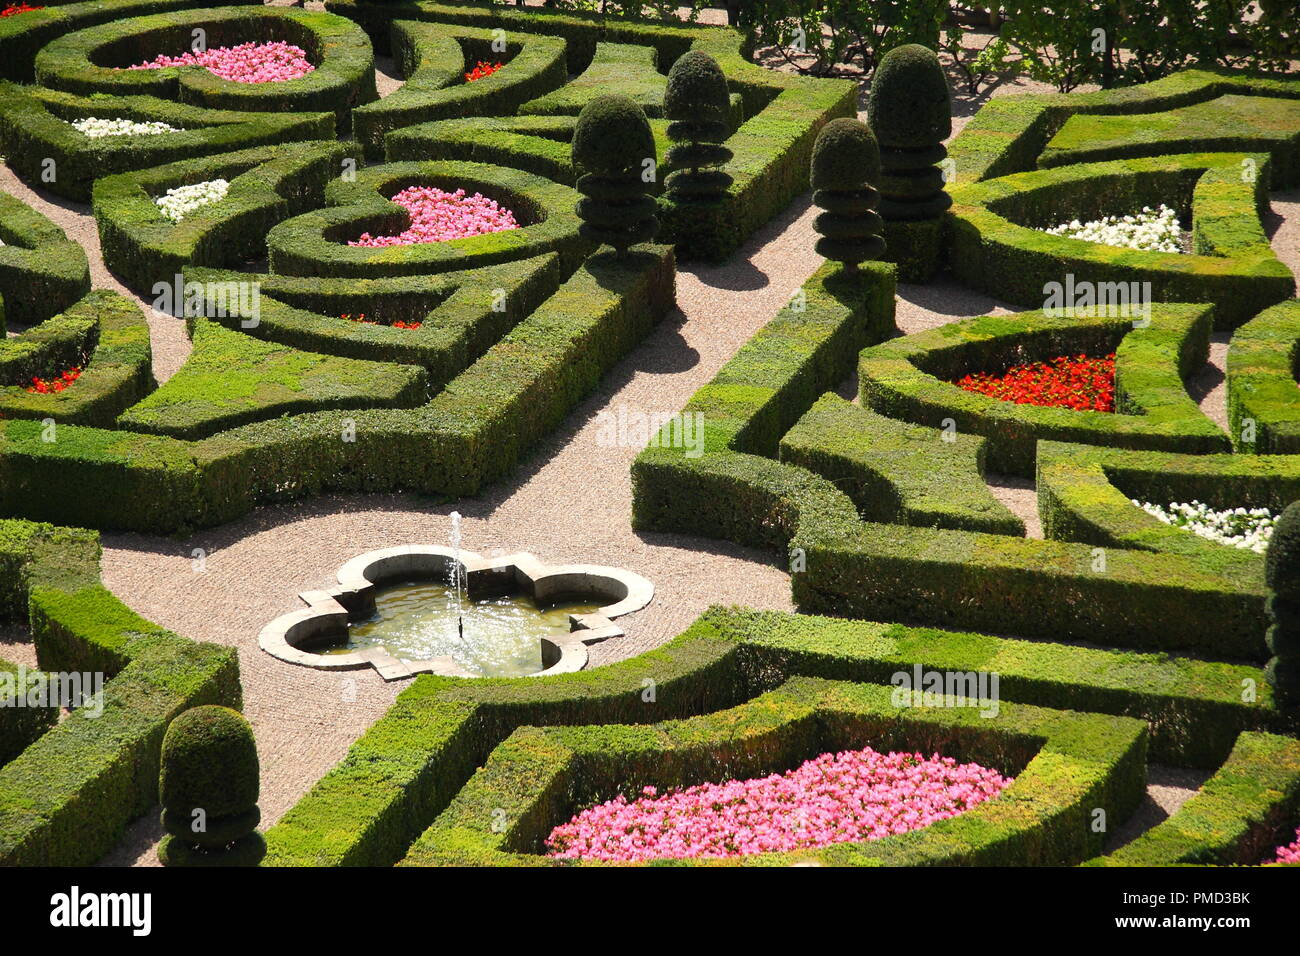 Obe of the most beautiful french gardens in 'Chateau de Villandry', Loire Valley, France. Stock Photo